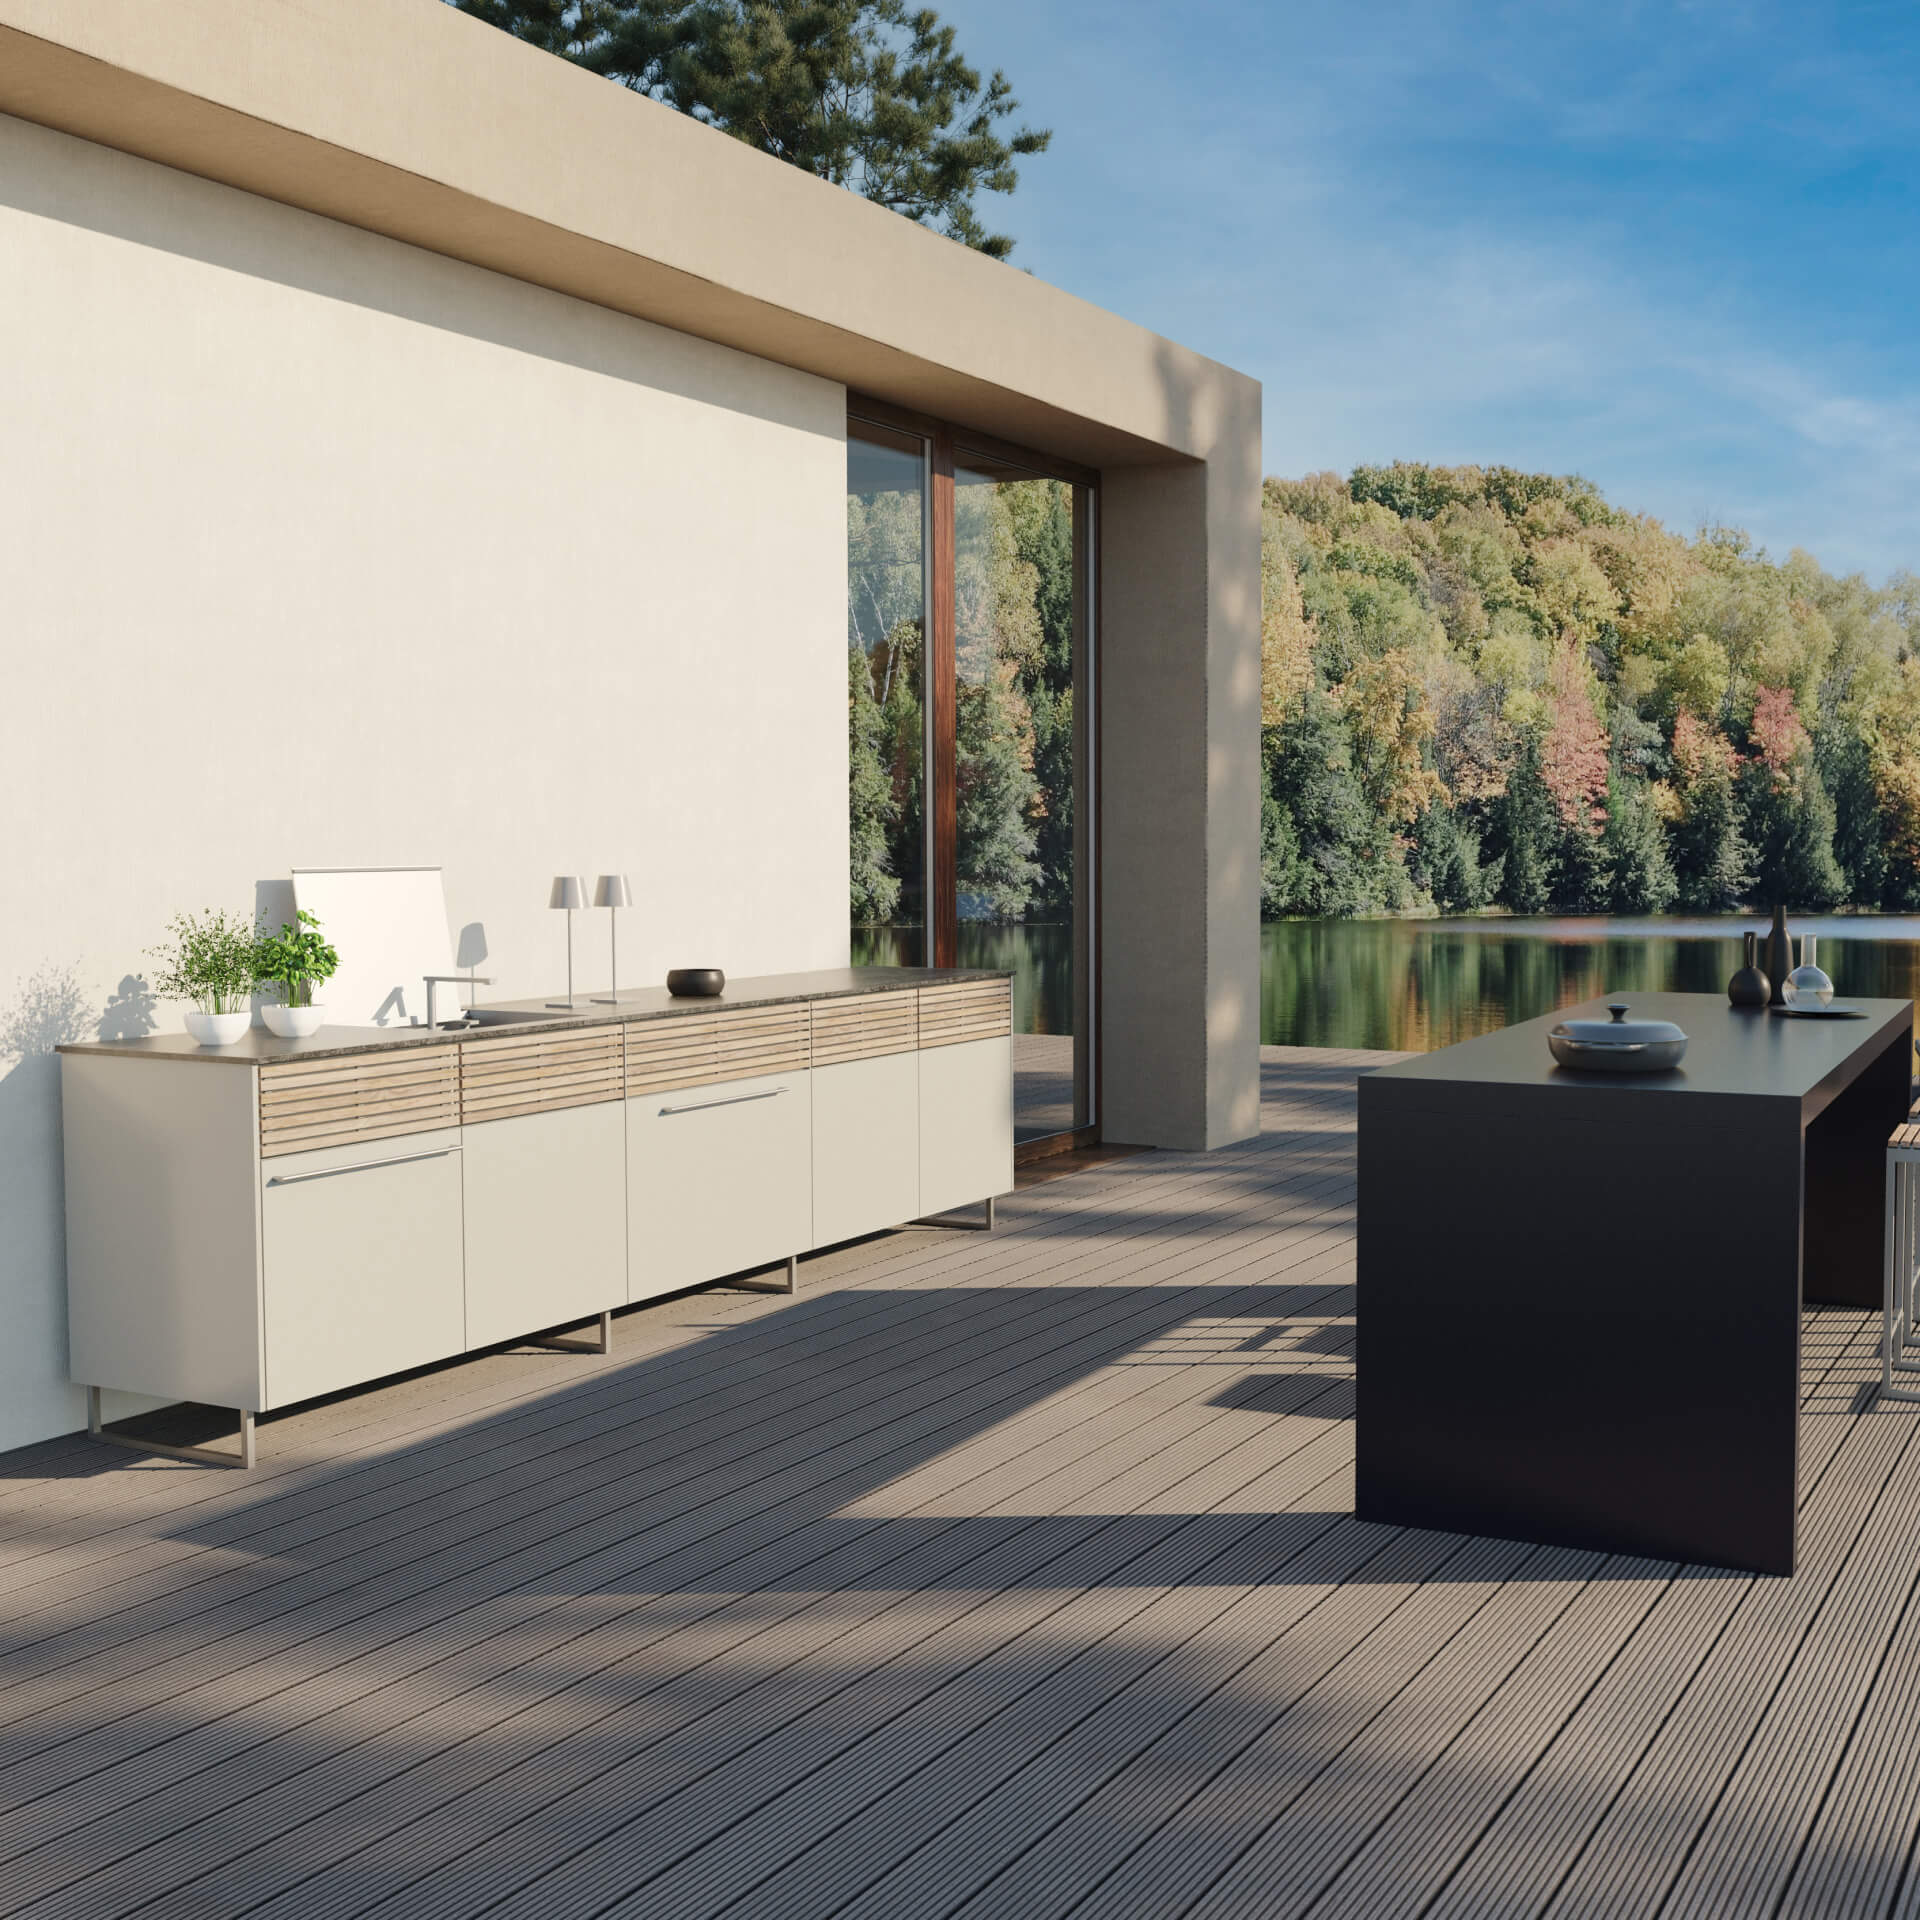 CUBIC OUTDOOR KITCHEN C1 with lamella cladding